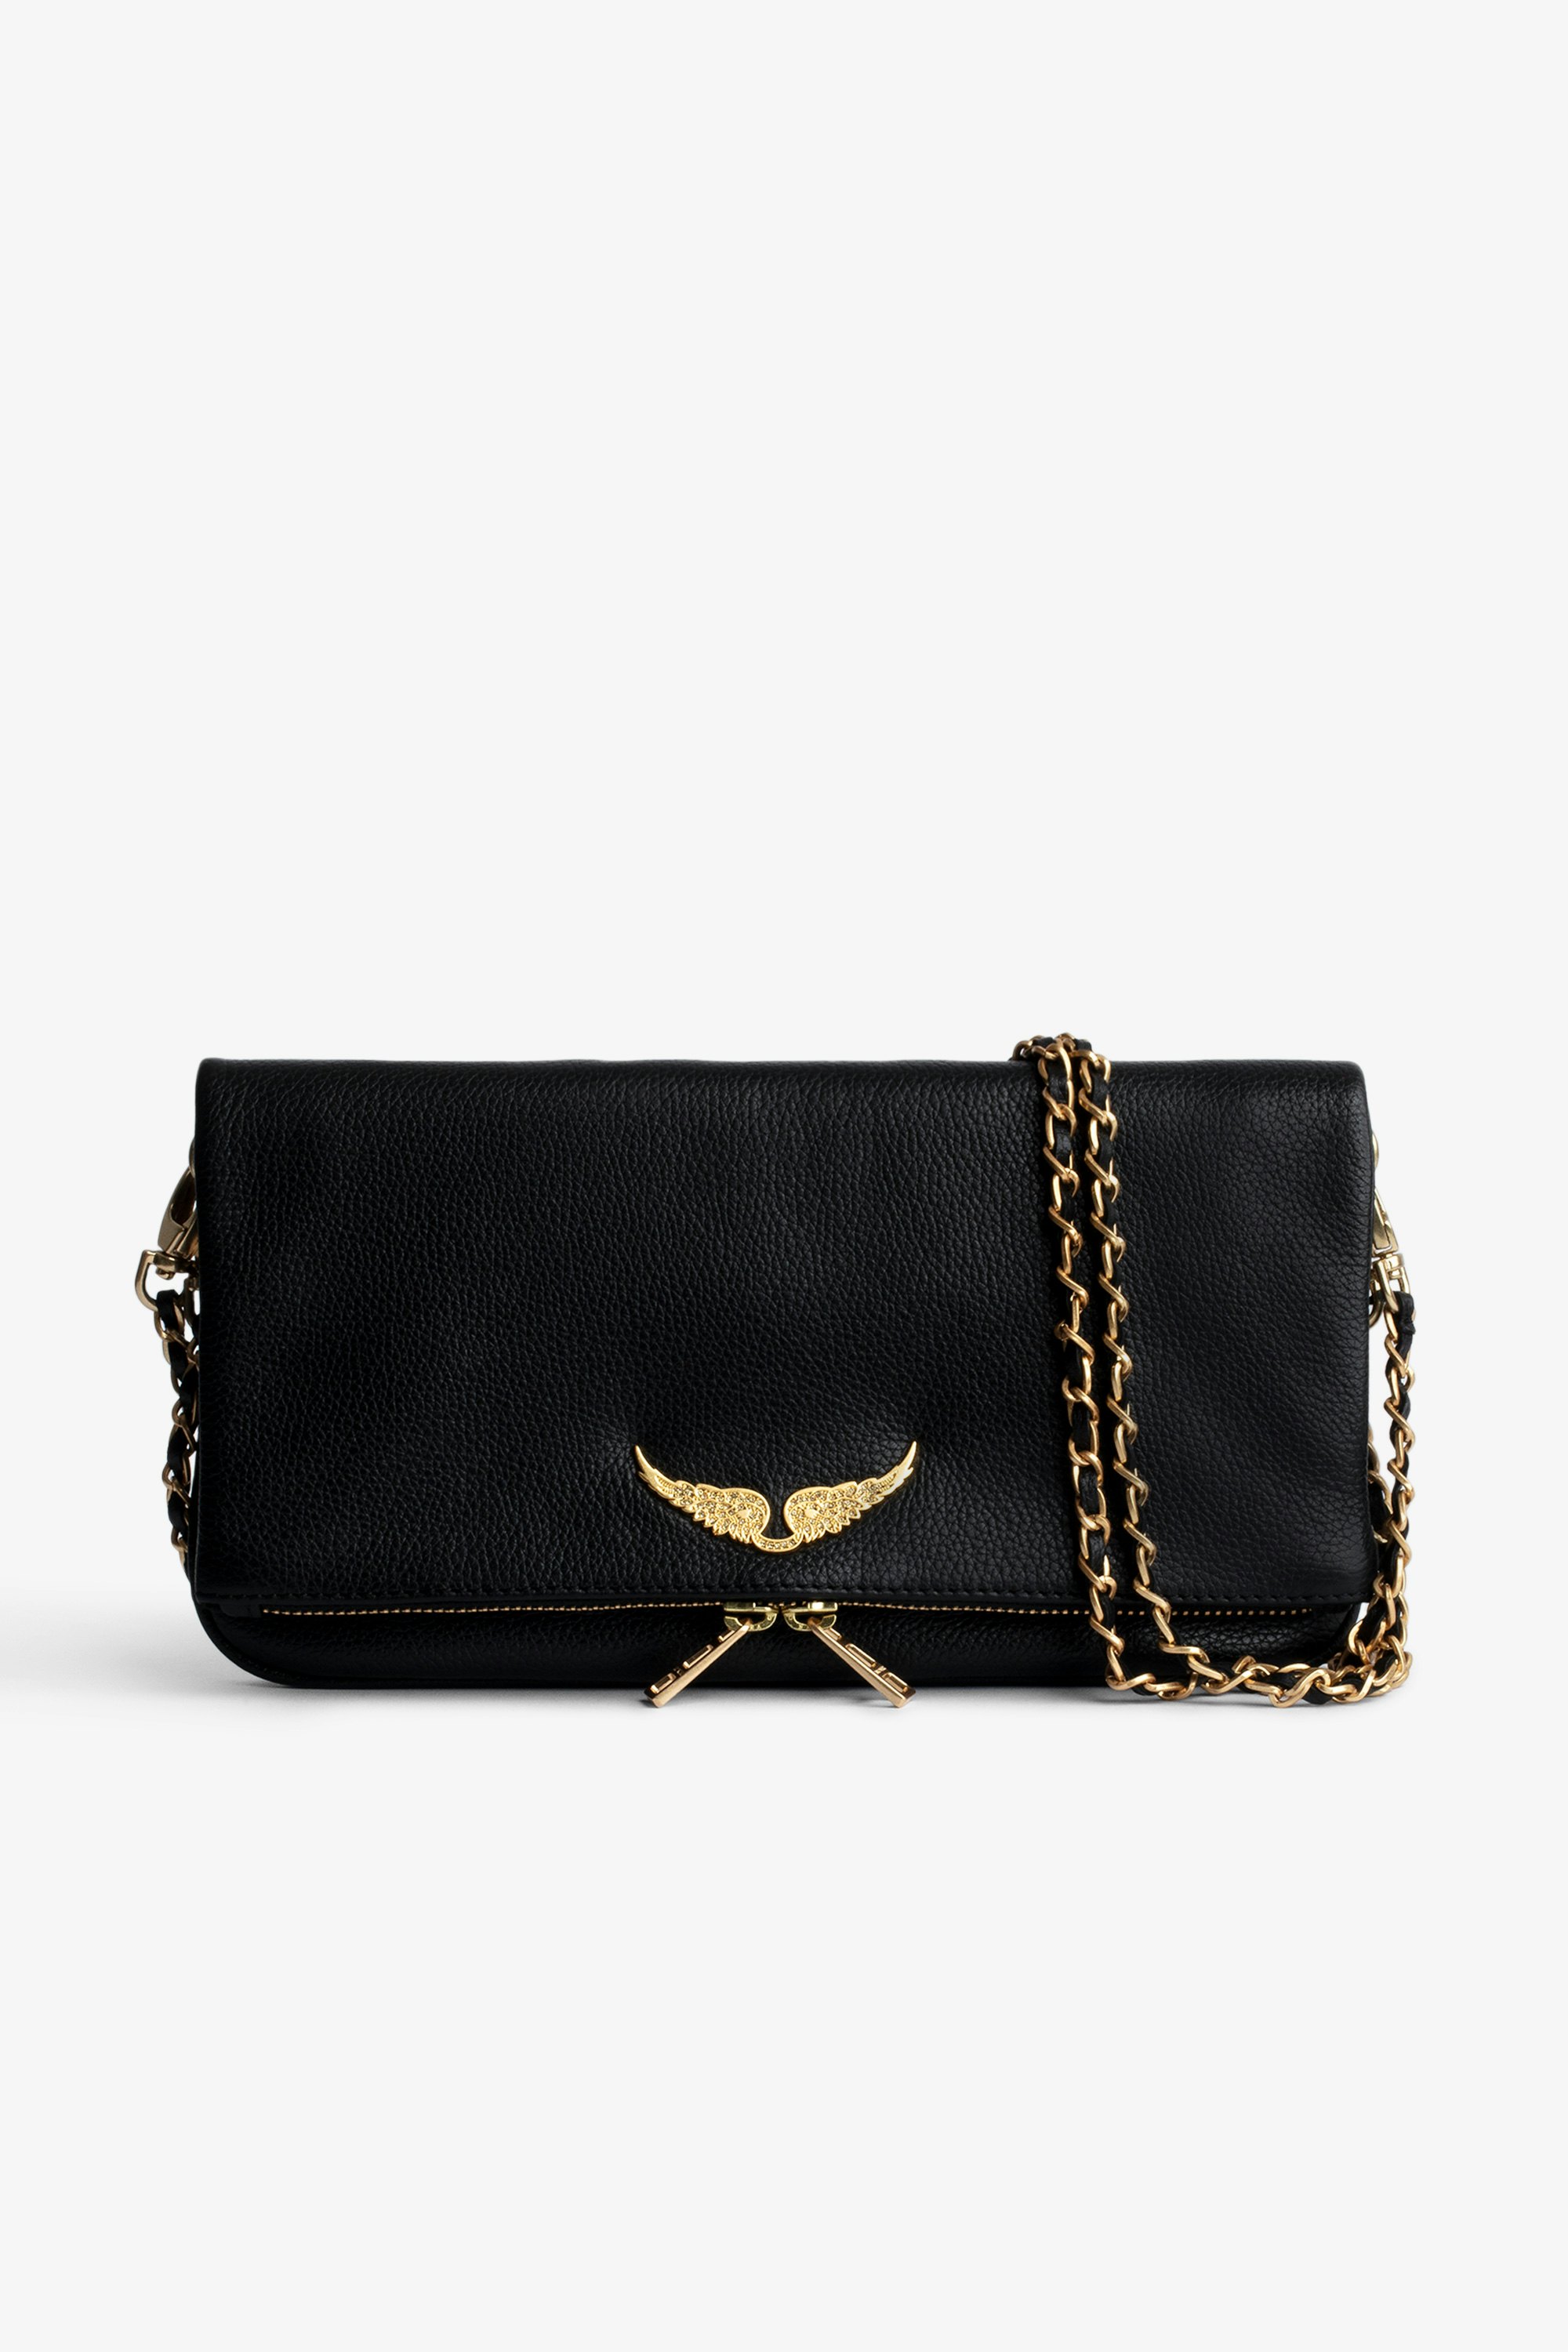 Rock クラッチバッグ Women’s black leather clutch with gold-toned detailing